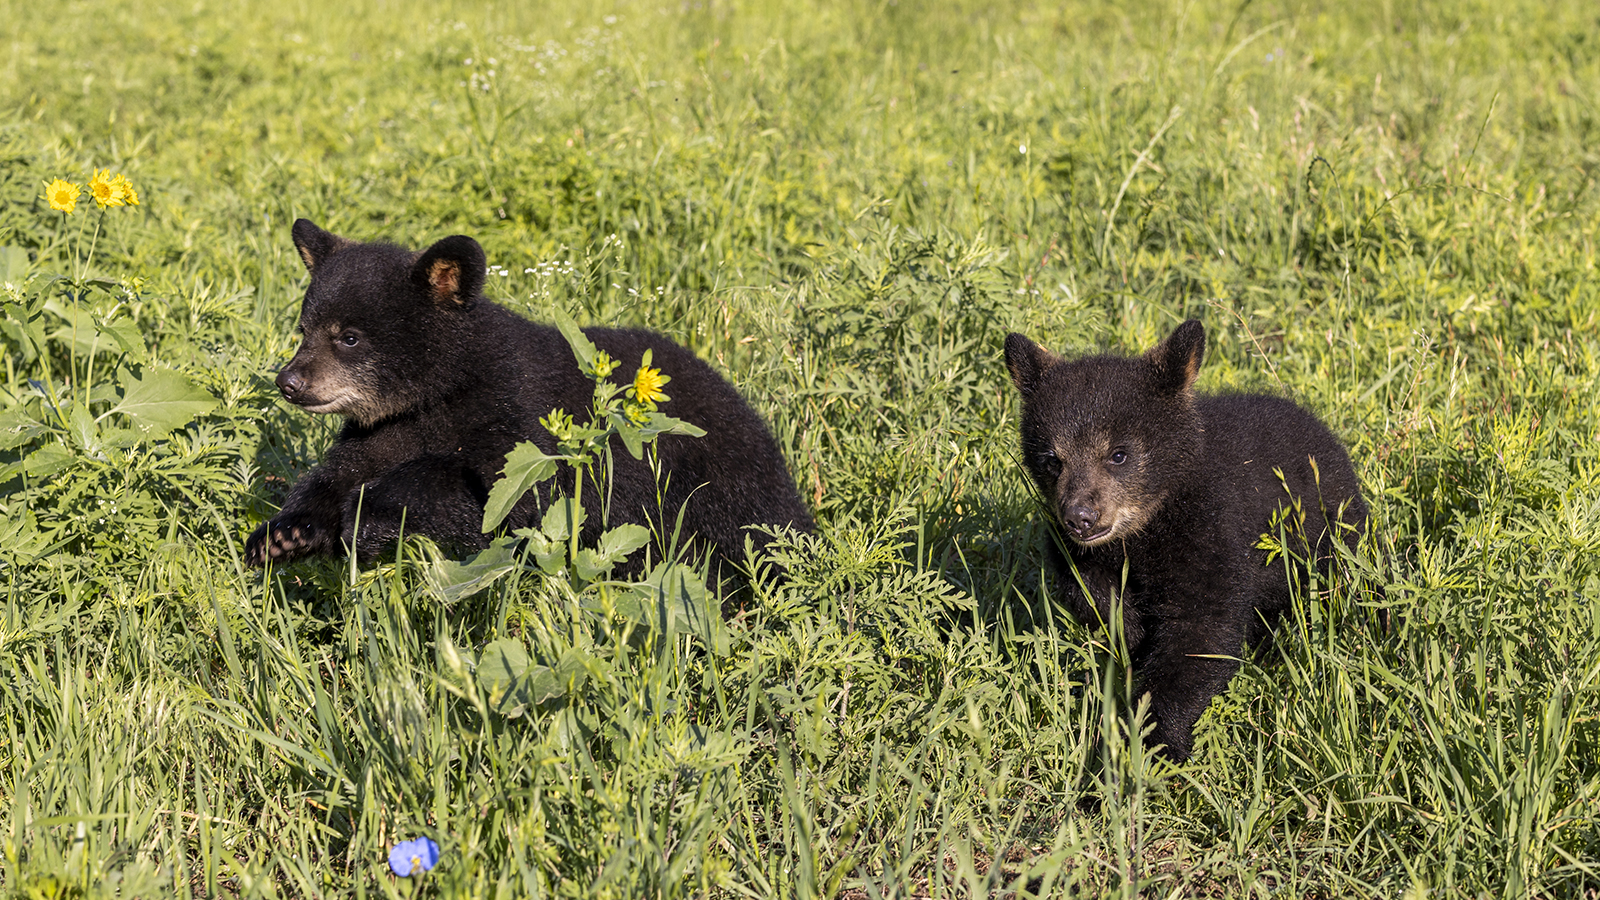 American black bear cubs in a green field with purple and gold flowers